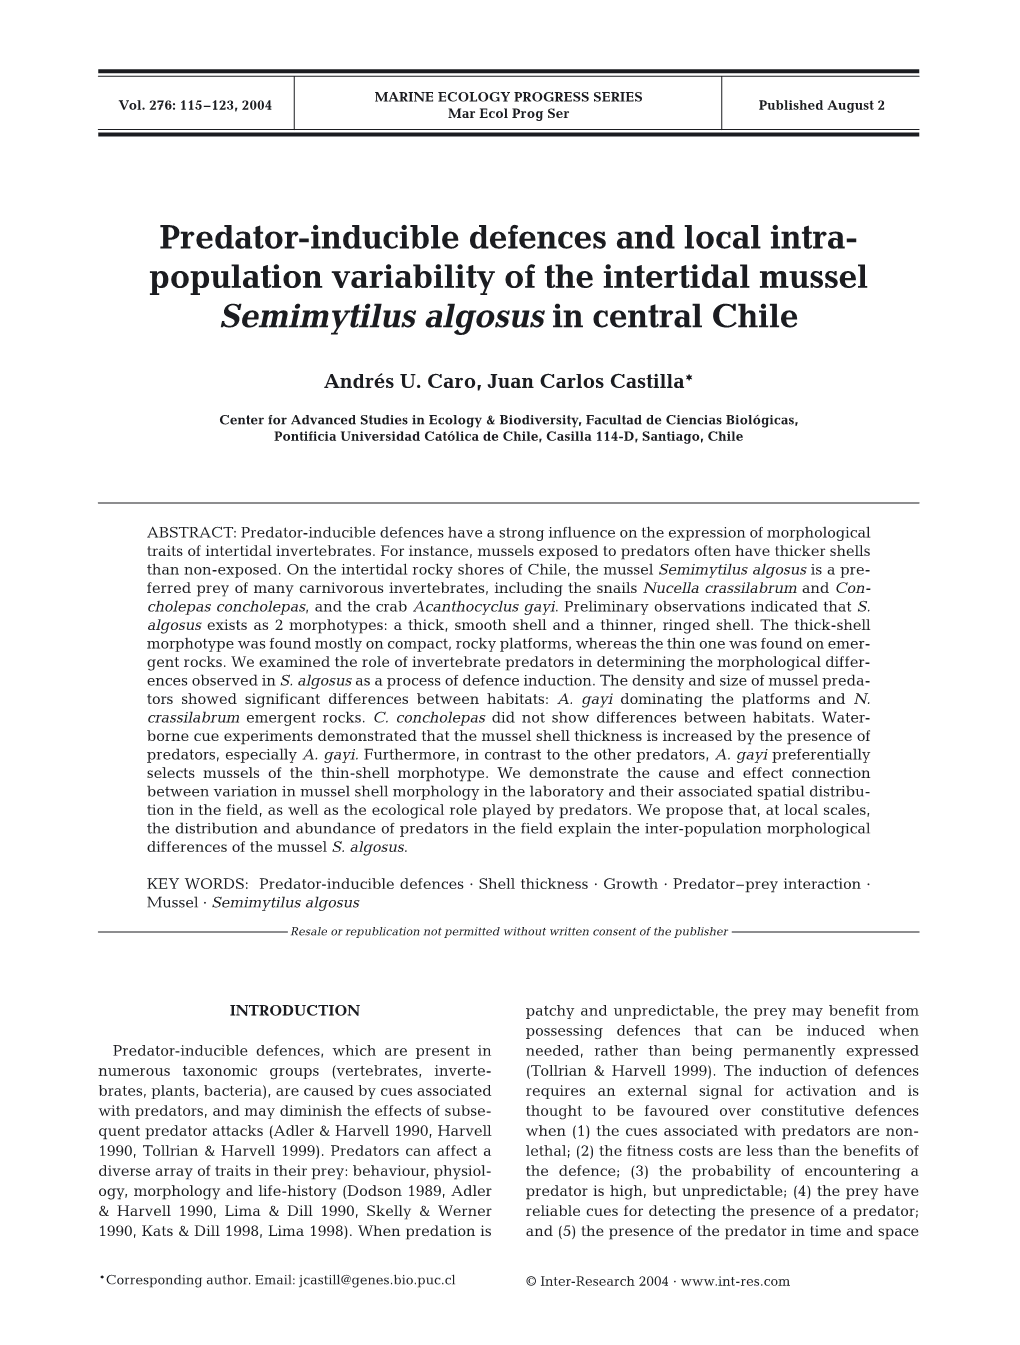 Predator-Inducible Defences and Local Intrapopulation Variability of The